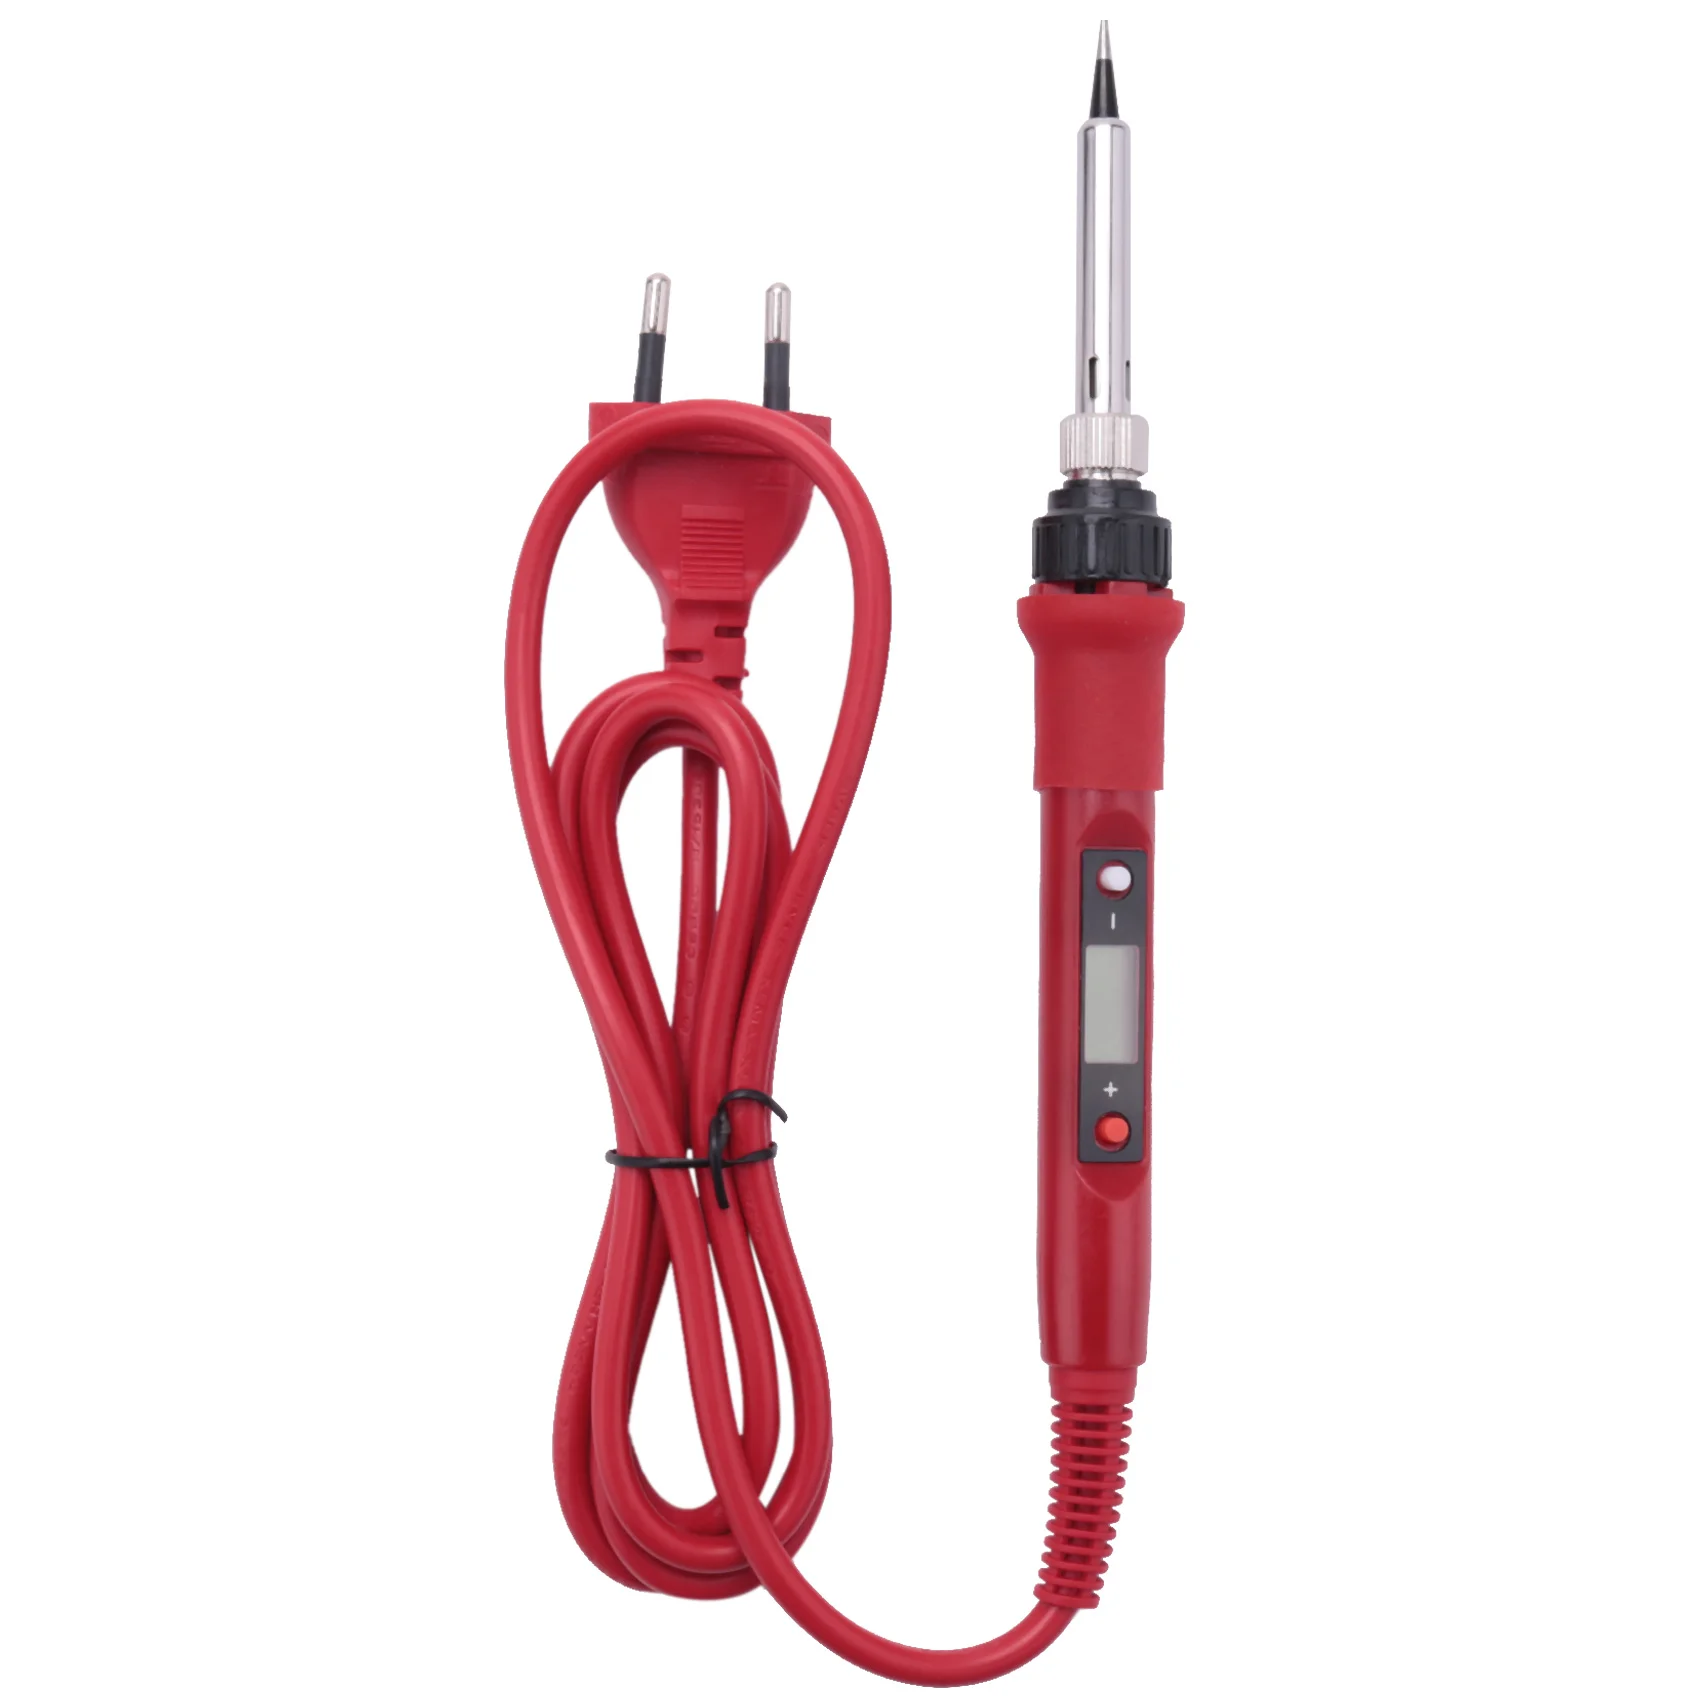 

220V 80W Lcd Electric Soldering Iron 908S Adjustable Temperature Solder Iron with Quality Soldering Iron Tips and Kits Eu Plug